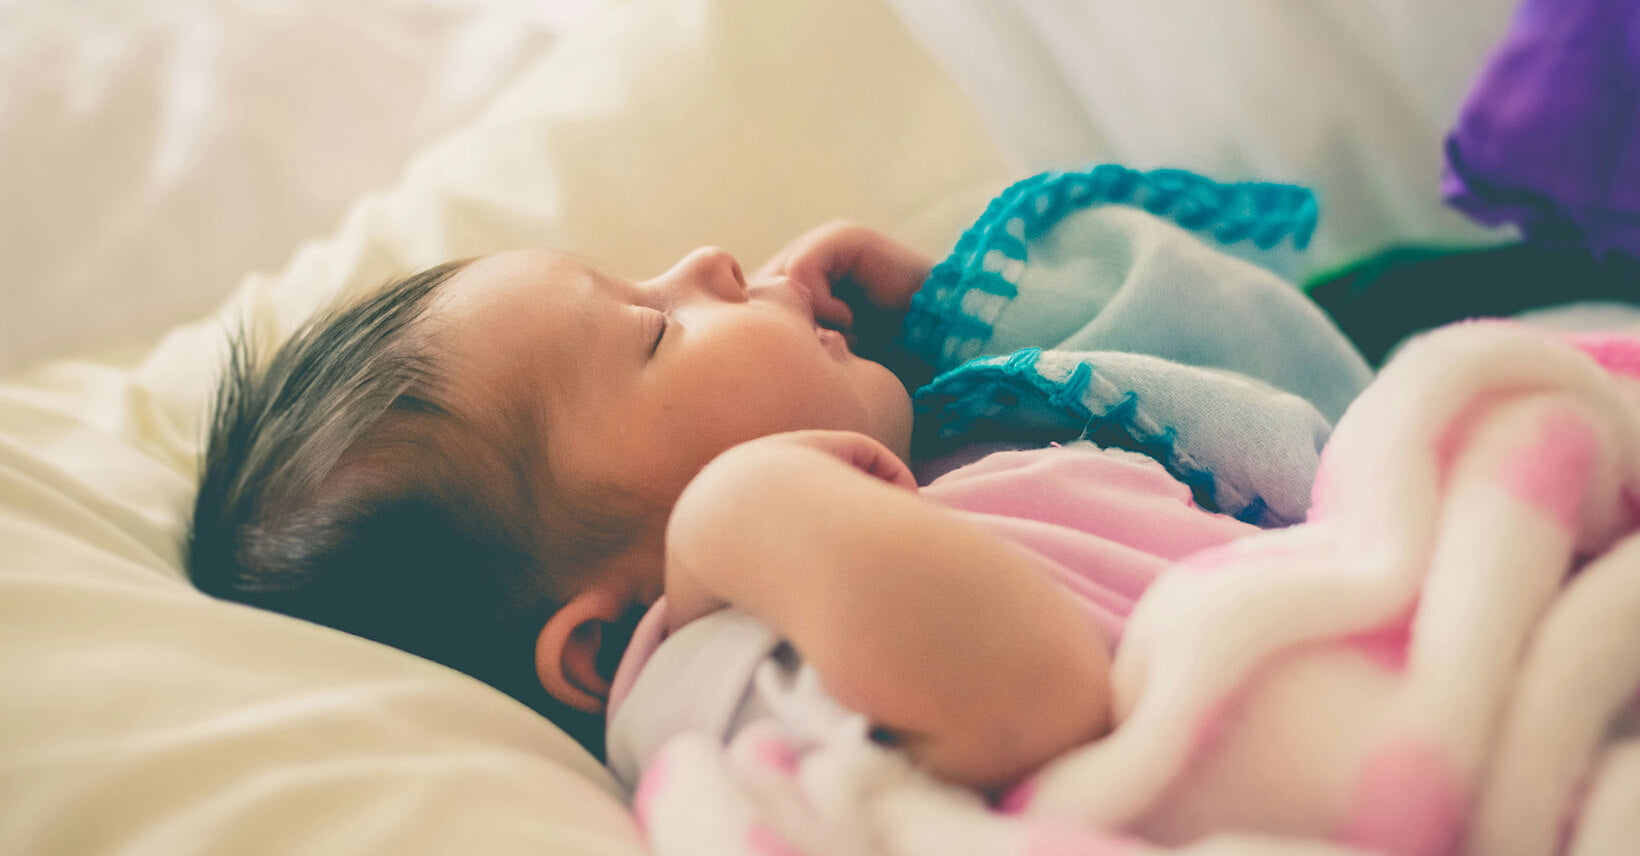 Signs and Tips for When Your Baby is Too Hot While Sleeping